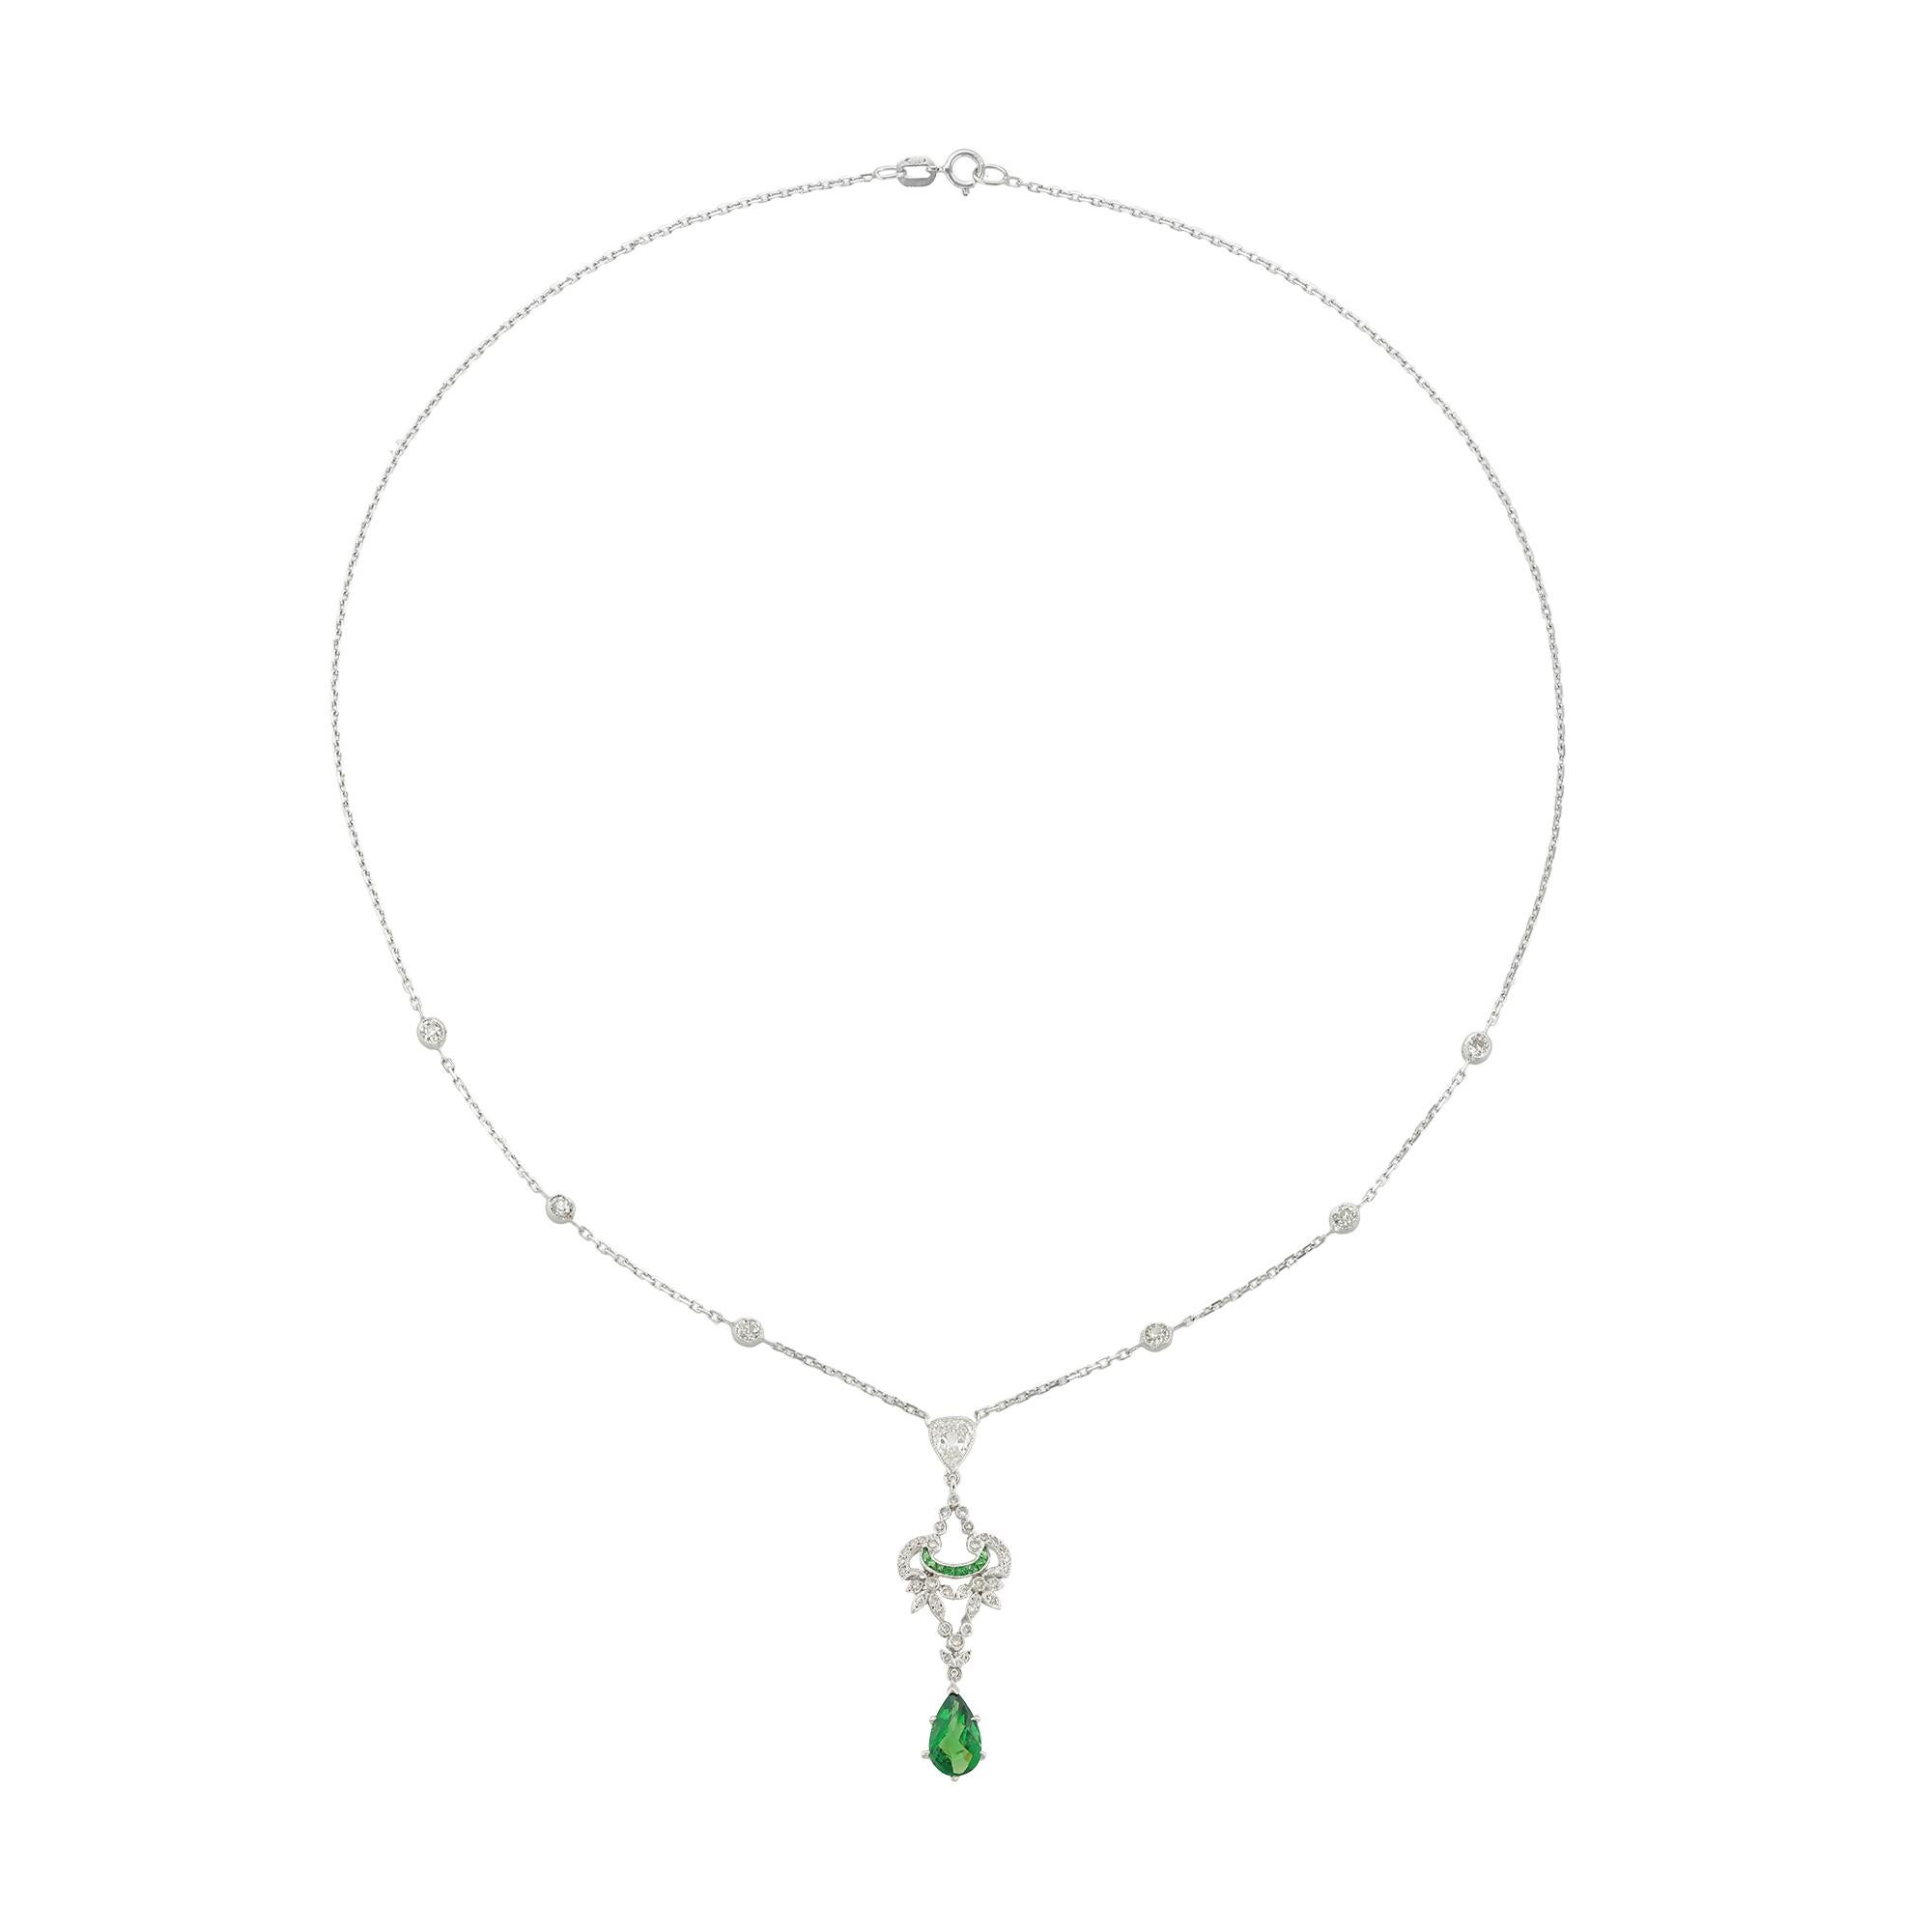 A green tourmaline and diamond drop pendant, the openwork scroll and foliate design plaque millegrain-set with small Swiss-cut diamonds and eight calibre-cut green garnets, with a pear-shaped rose-cut green tourmaline drop, all suspended by an old